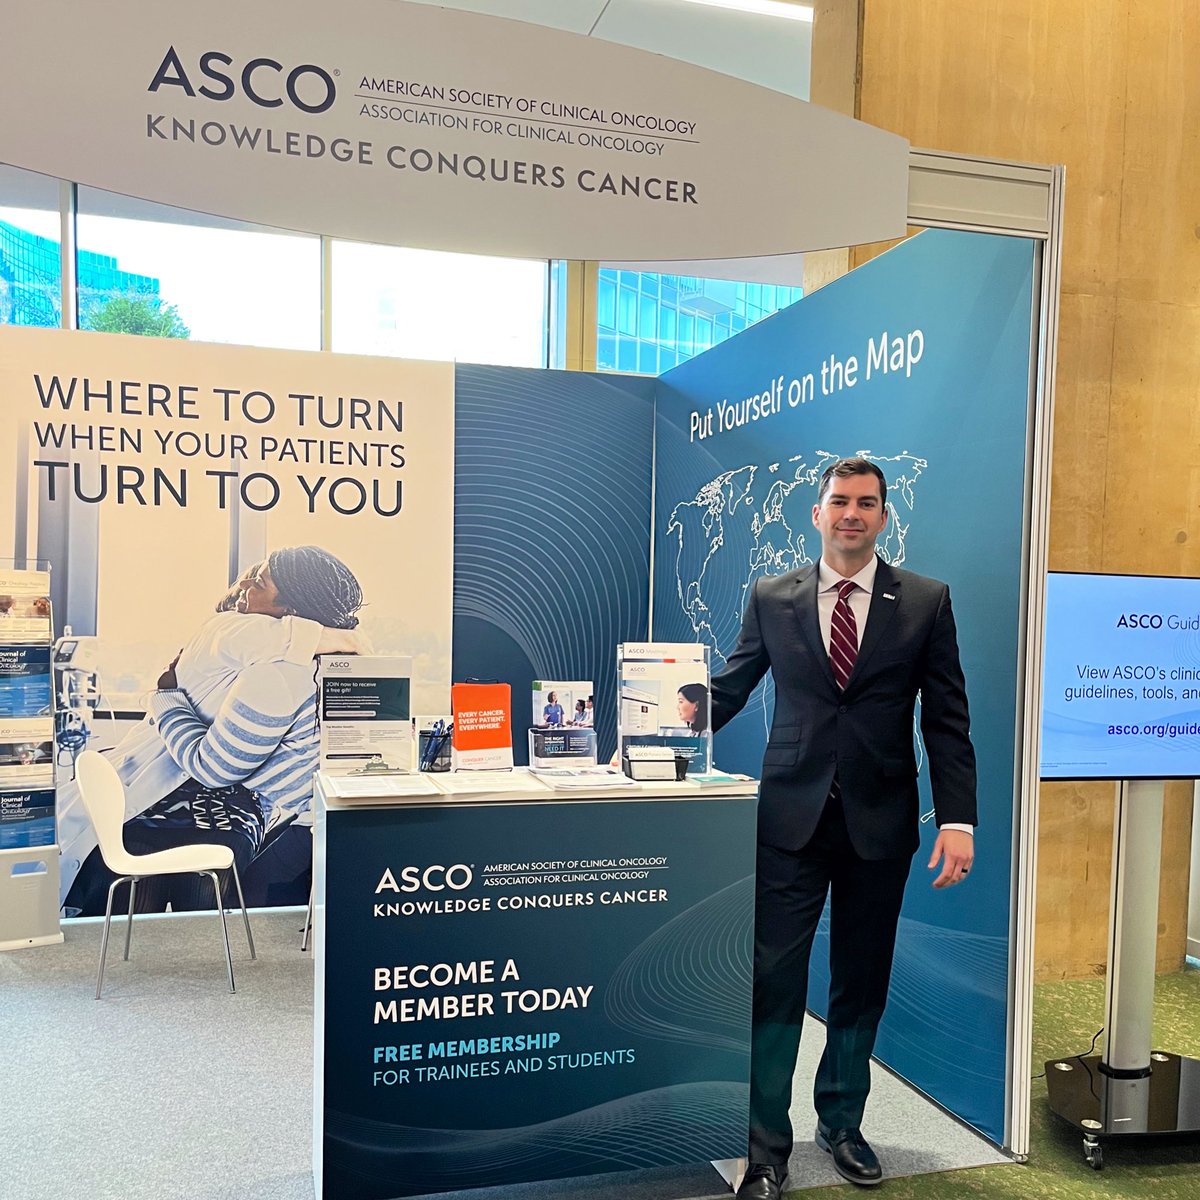 We're thrilled to be at #WorldCancerCongress #WCC2022! Visit us at stand no. 7 to: 🗺️ Put yourself on the map ⭐ Access our membership special 🤝 Meet @JCOGO_ASCO EIC @GlopesMd on Weds 10/19 @ 12:40 PM CET 🤓 Learn about our sessions on cancer treatment & palliative care